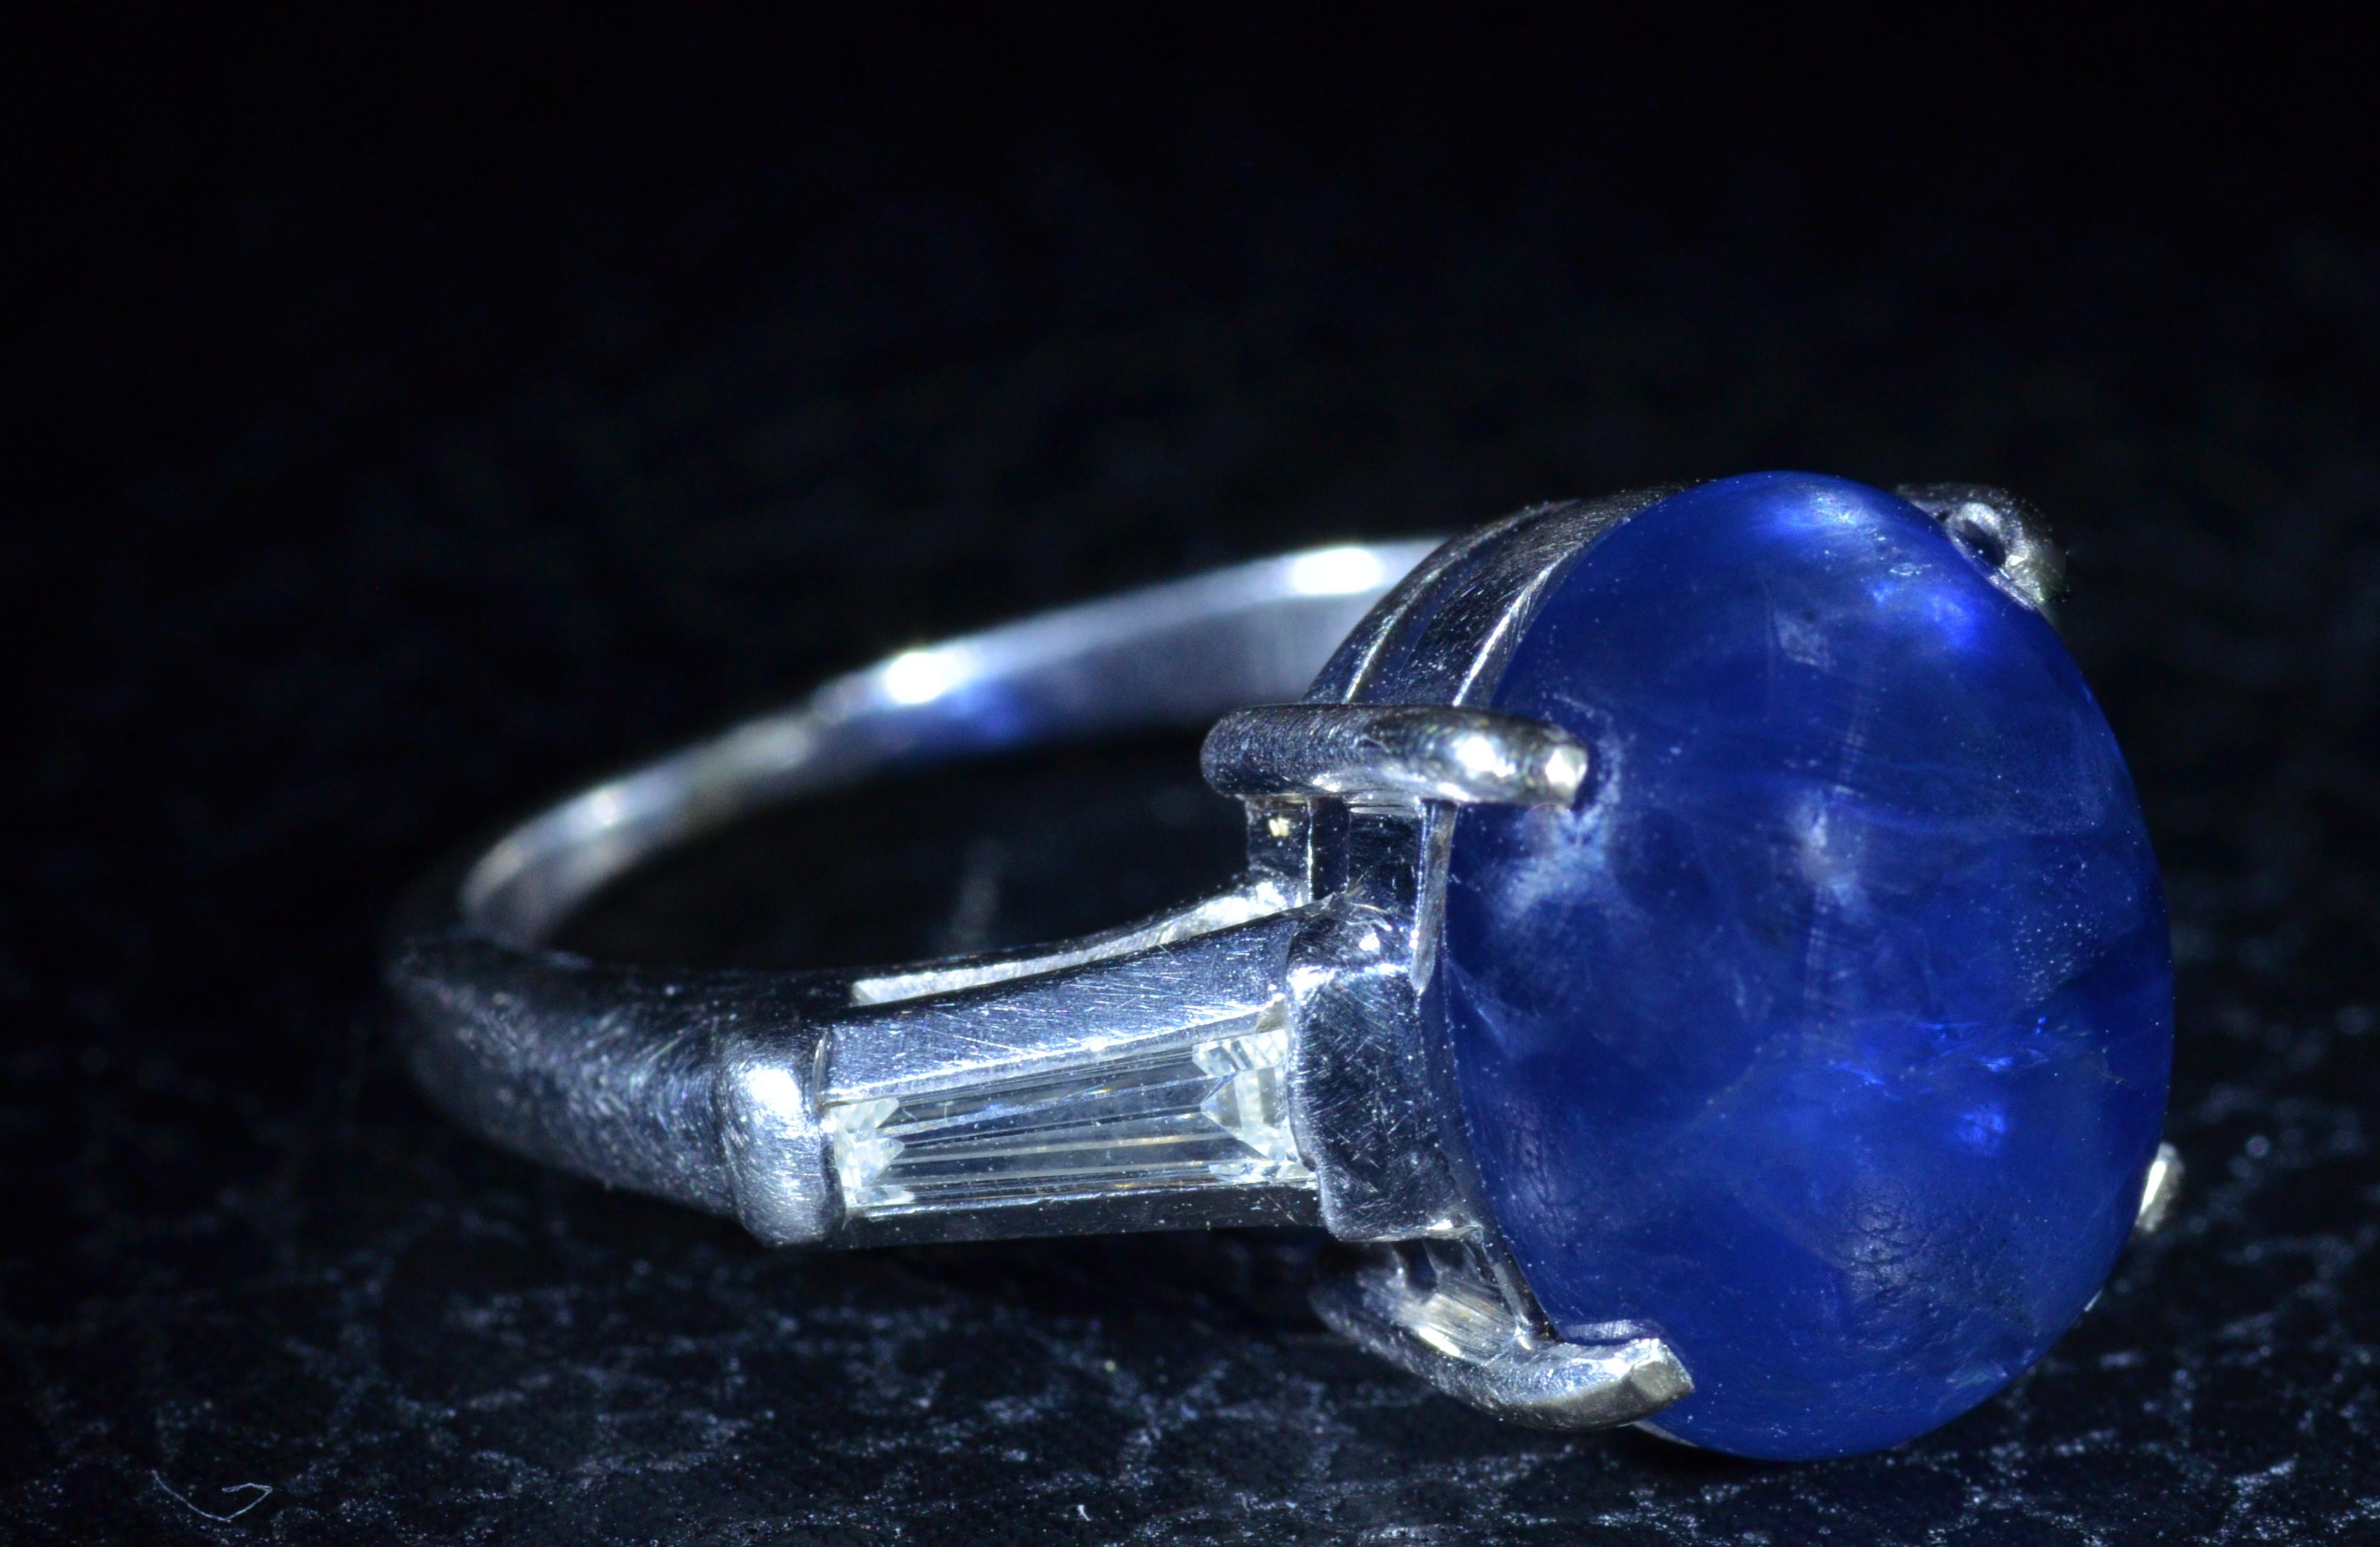 Ladies 6.62 Carat Cabochon Sapphire Ring in Platinum.  On either side of the violetish-Blue sapphire is a single tapered baguette with an approximate total weight by measurement of 0.30 carats. 